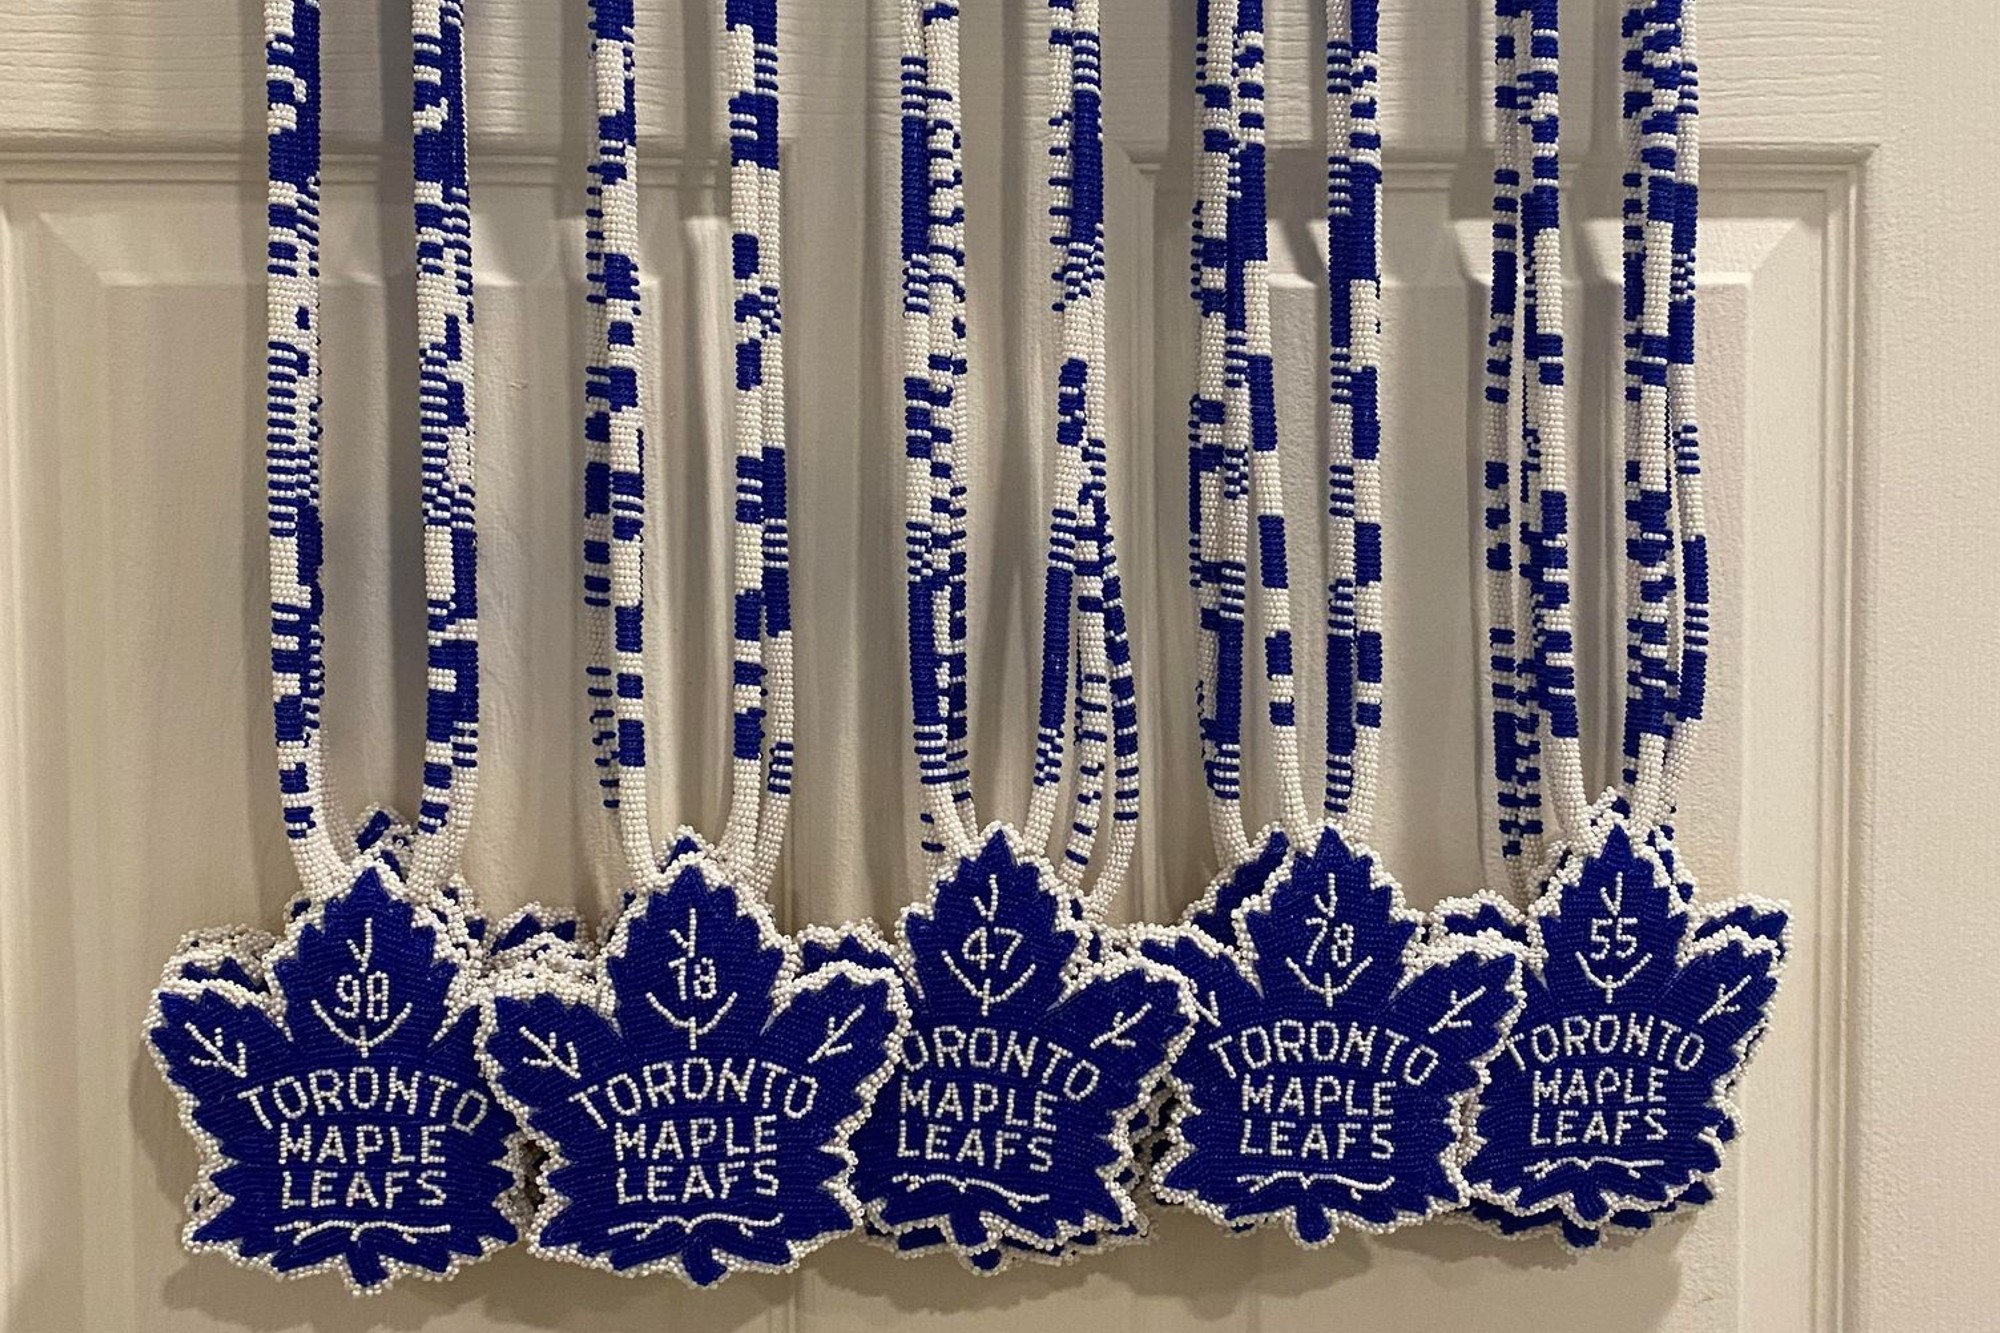 Toronto Maple Leafs sport work of Northern Indigenous artists - Timmins News